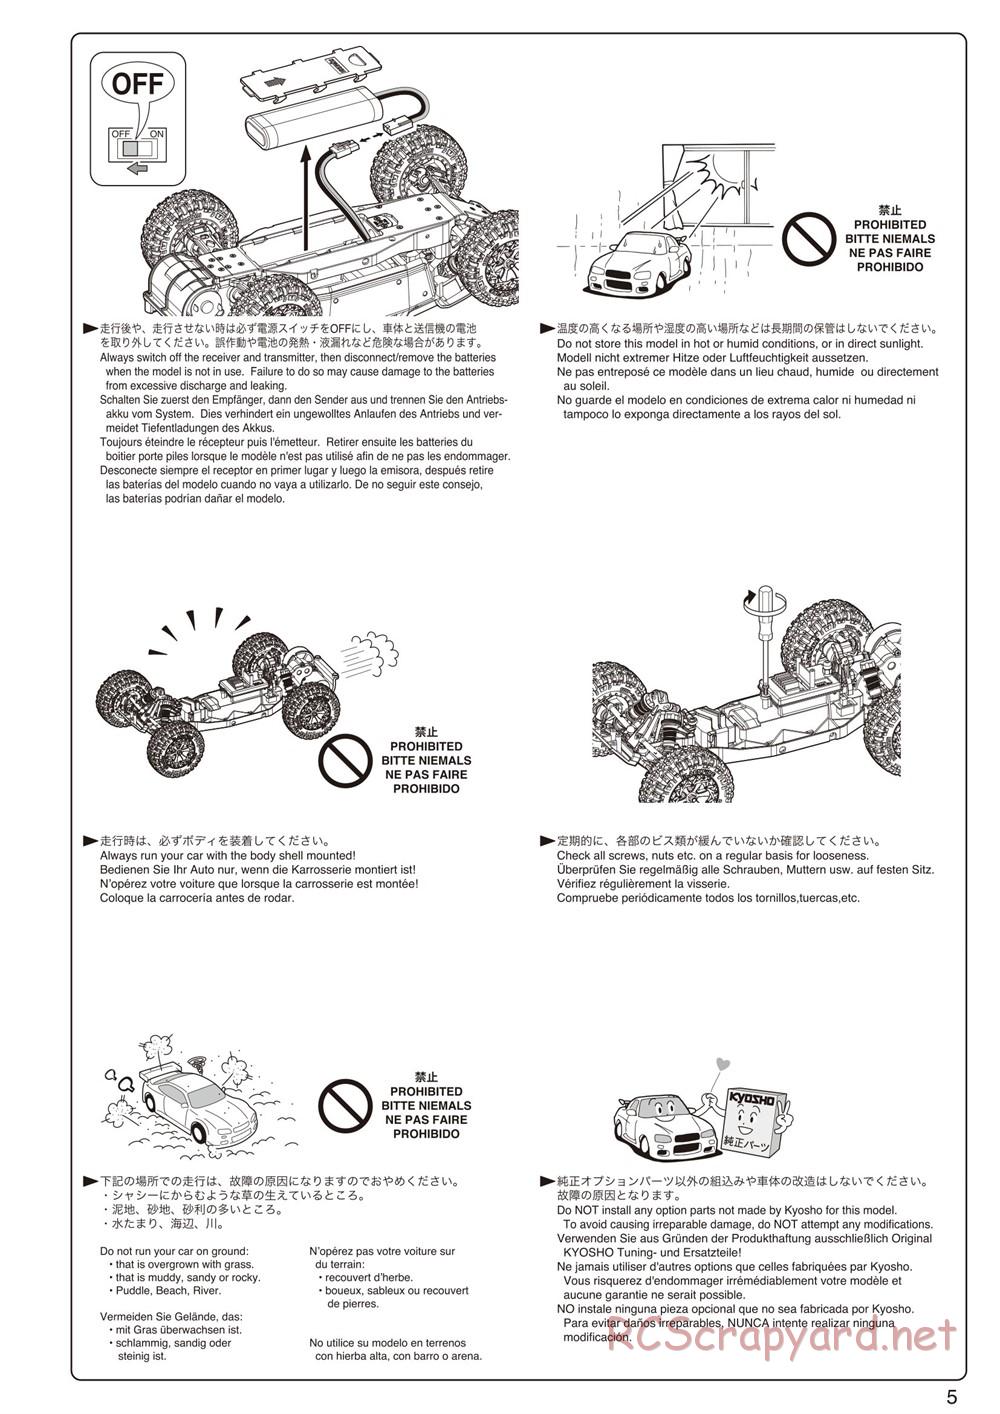 Kyosho - Axxe 2WD Desert Buggy - Manual - Page 5